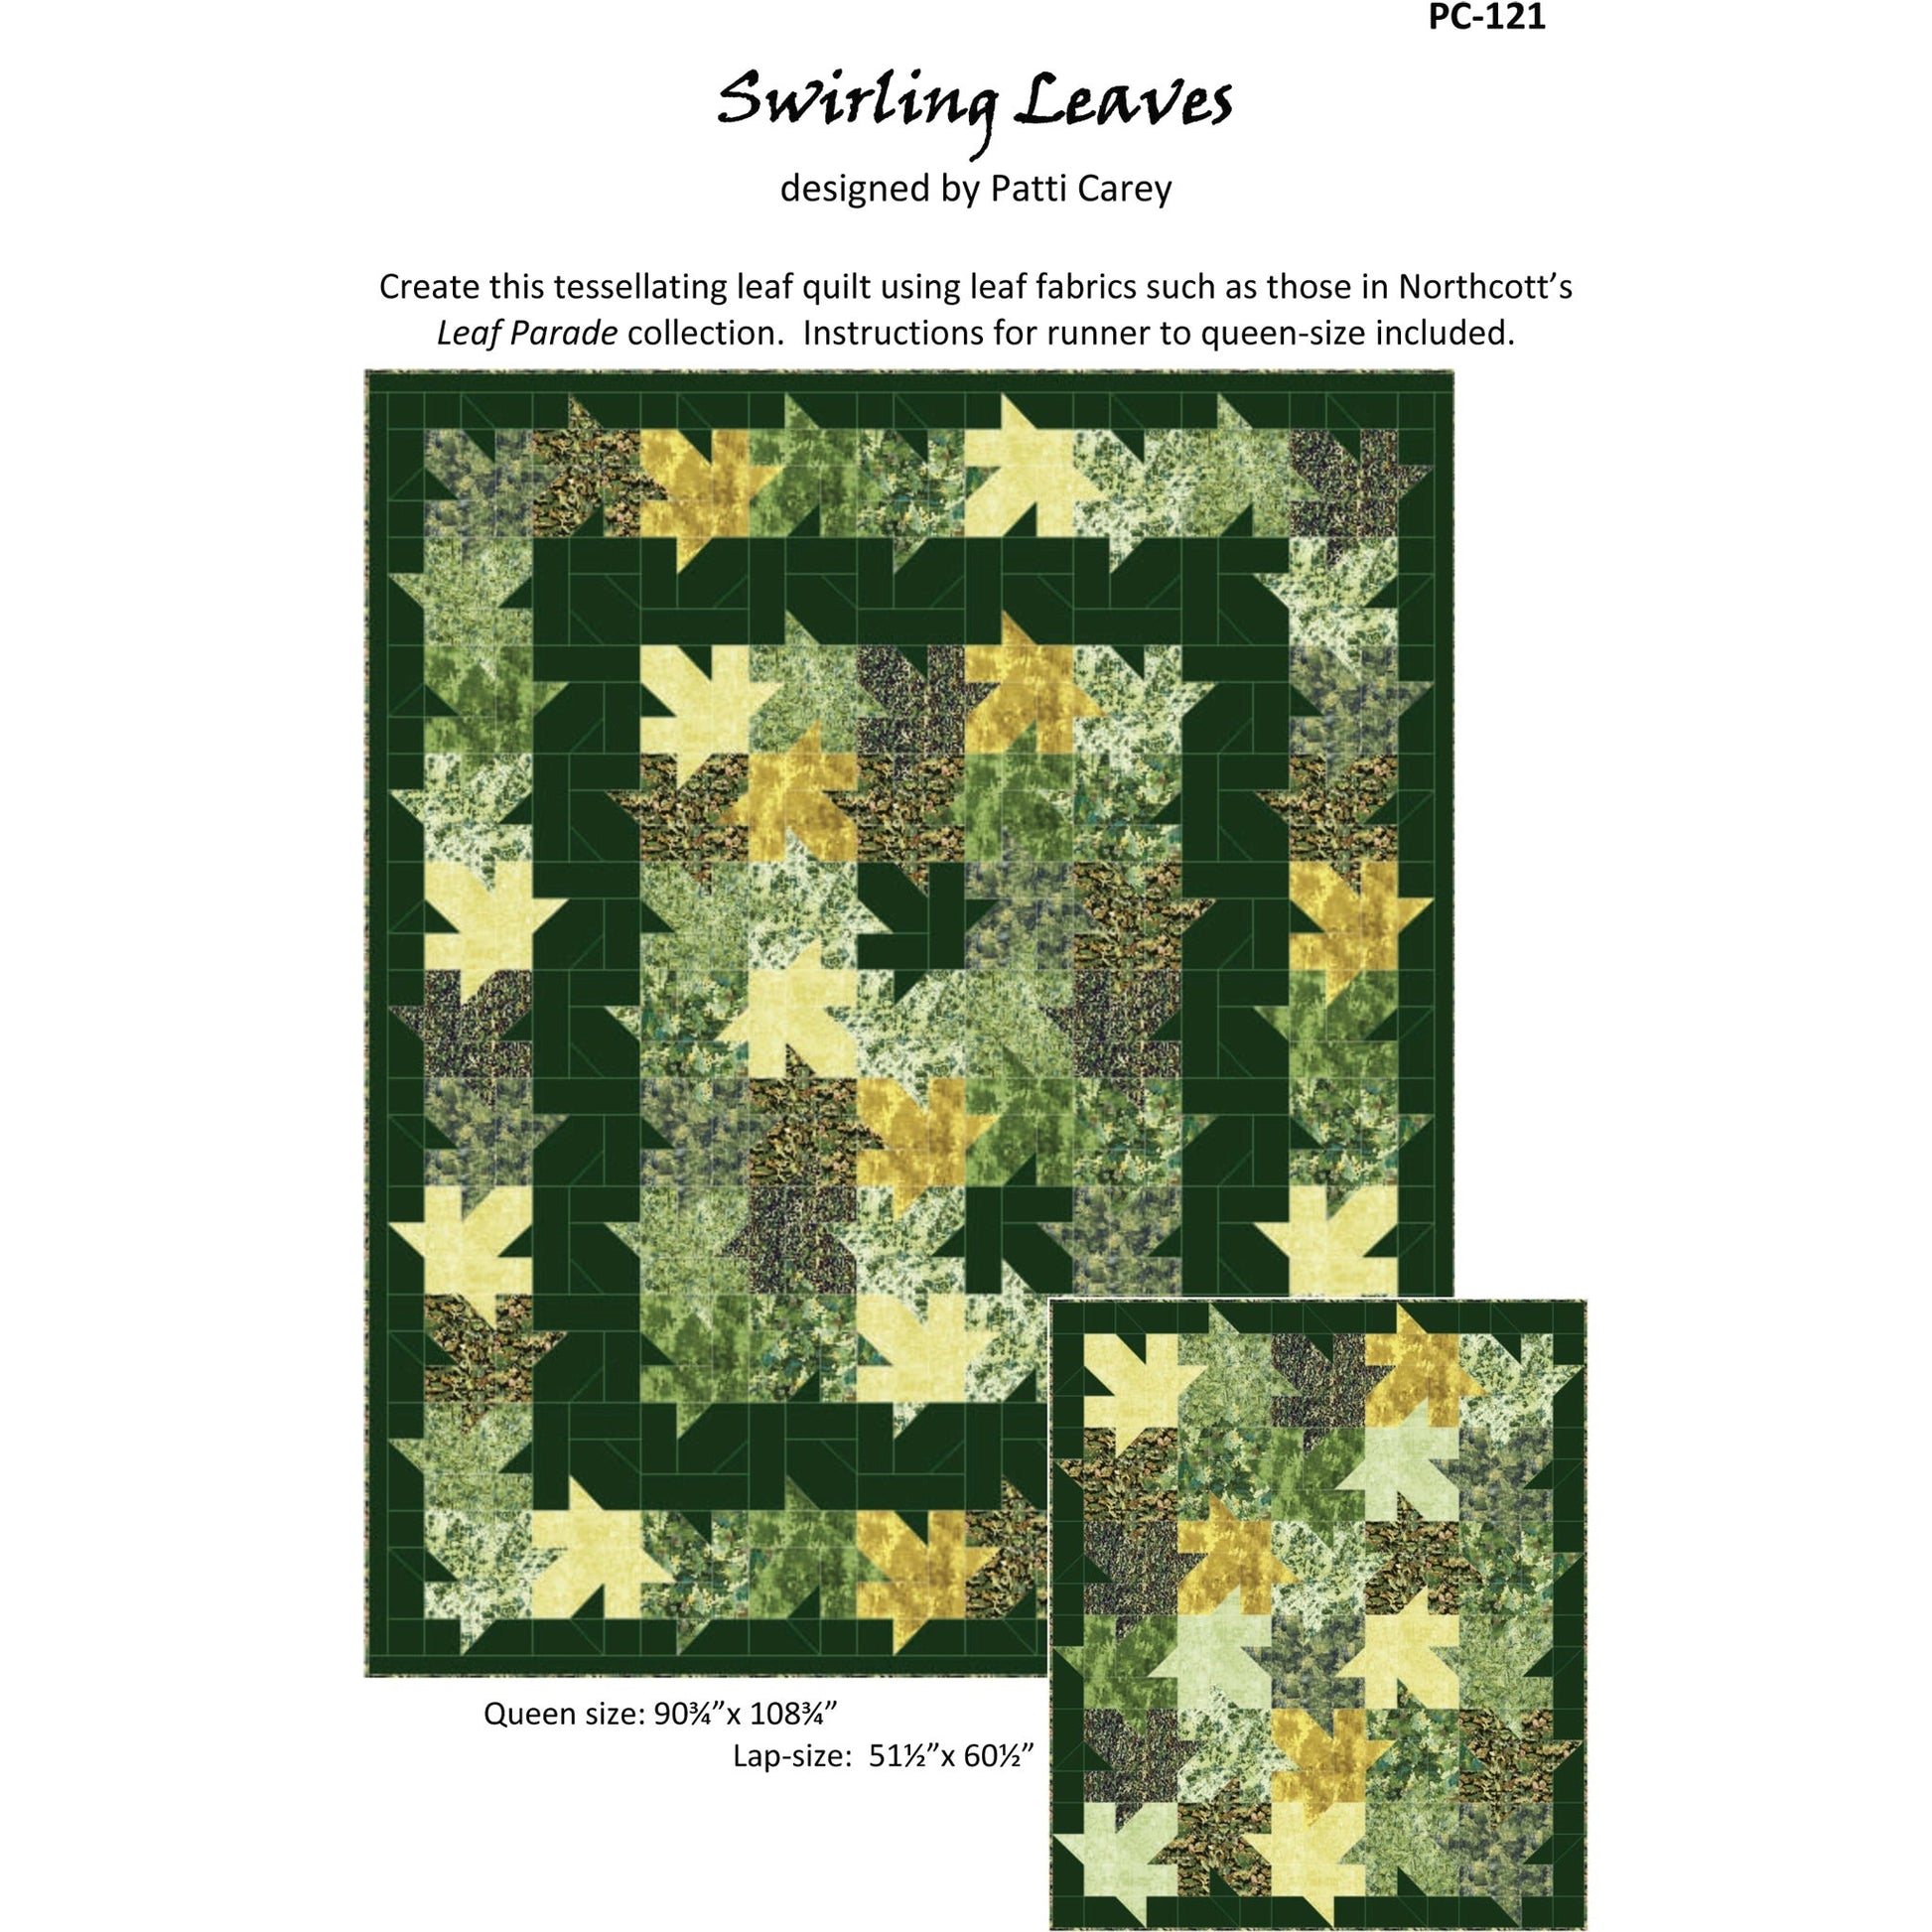 Cover image of pattern for Swirling Leaves Quilts and Runner.